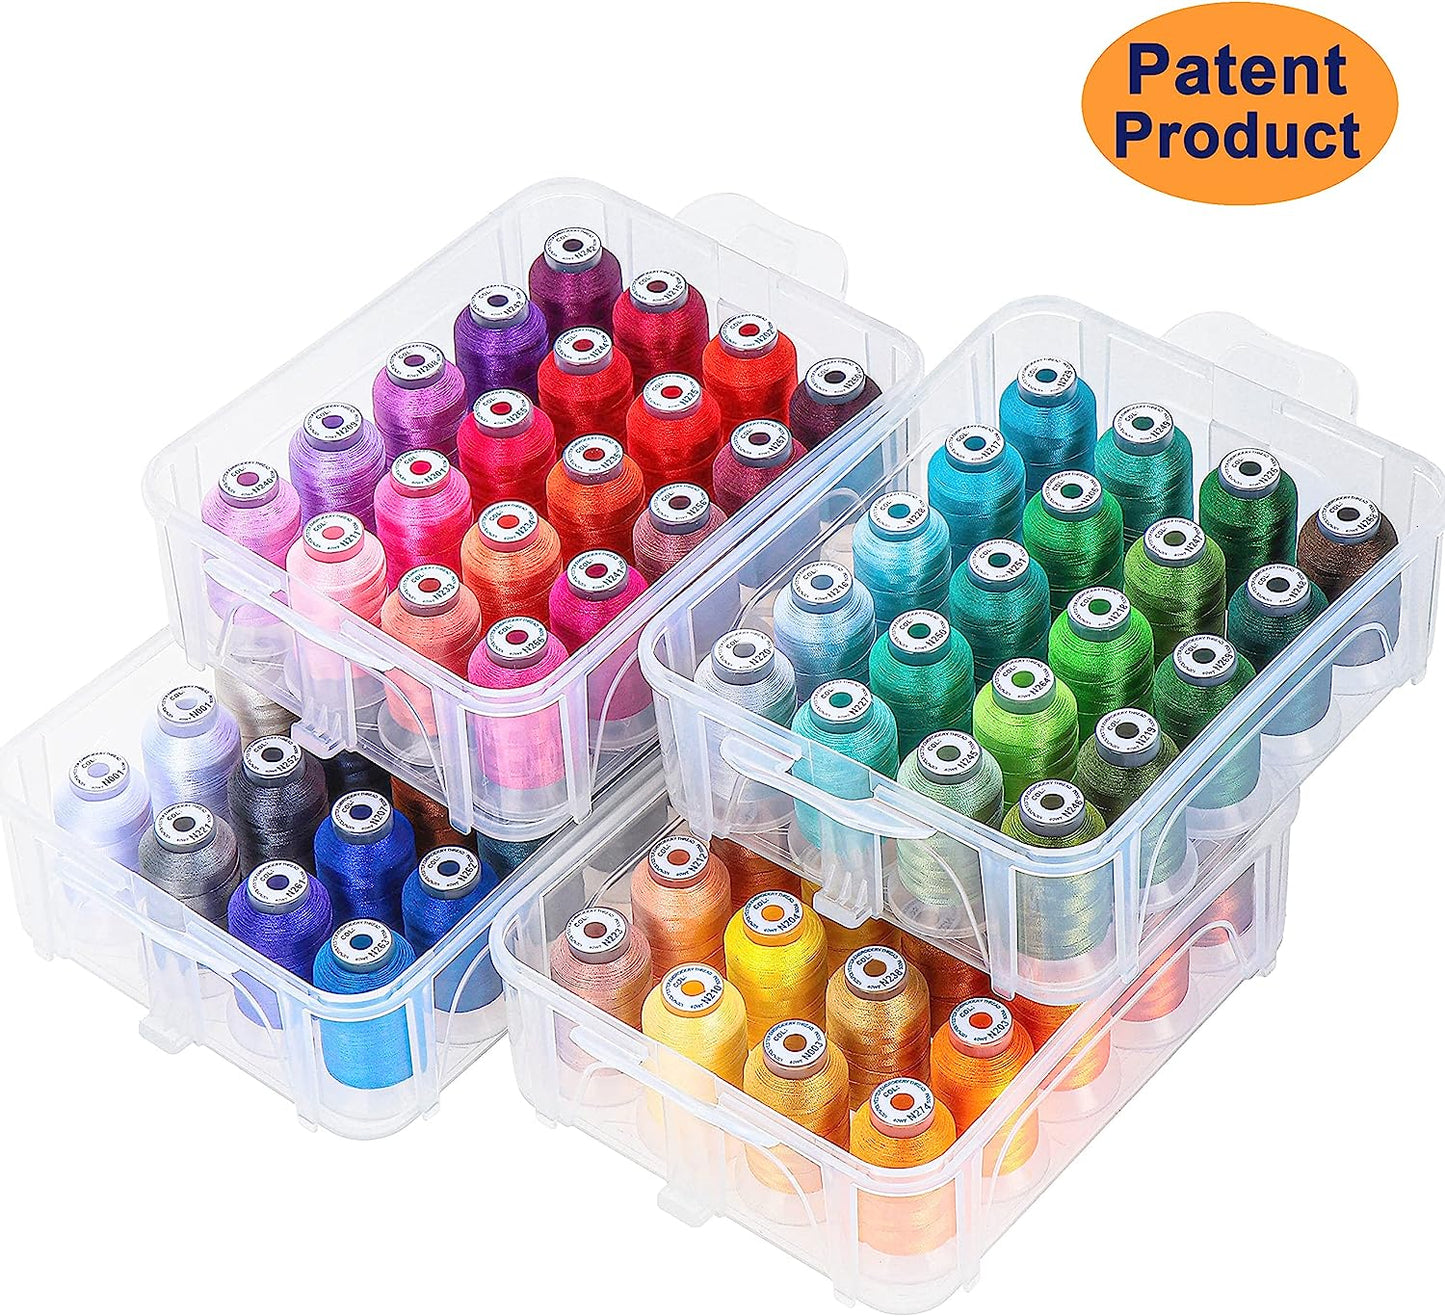 80 Spools 500M Each Embroidery Machine Thread with Clear Plastic Storage Box - Colors Compatible with Janome and Robison-Anton Colors